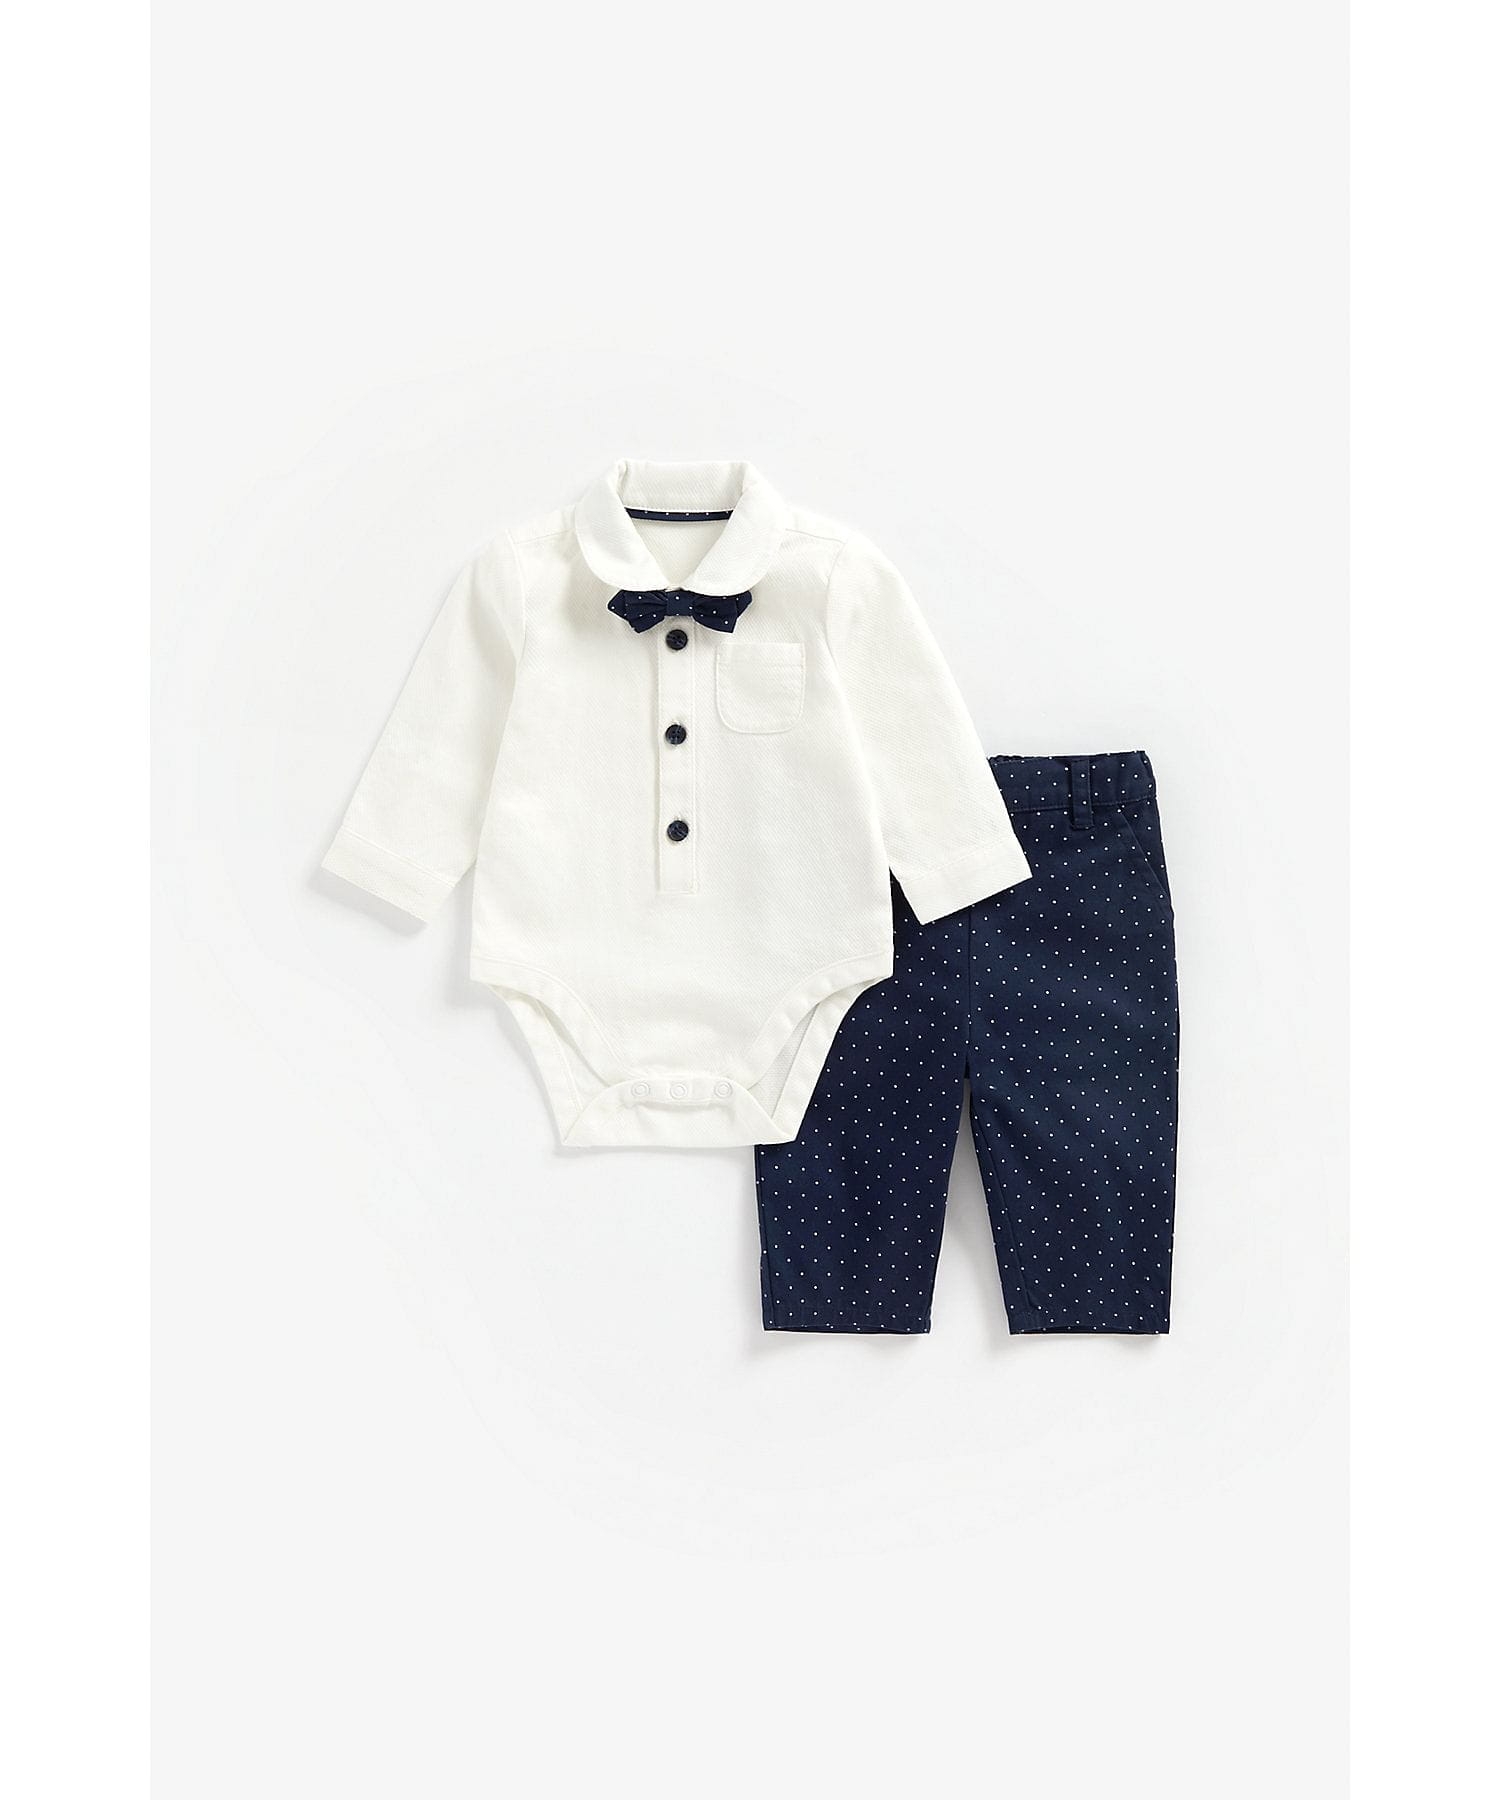 Mothercare | Boys Full Sleeves Bodysuit, Bow Tie And Trousers Party Set - Navy 0